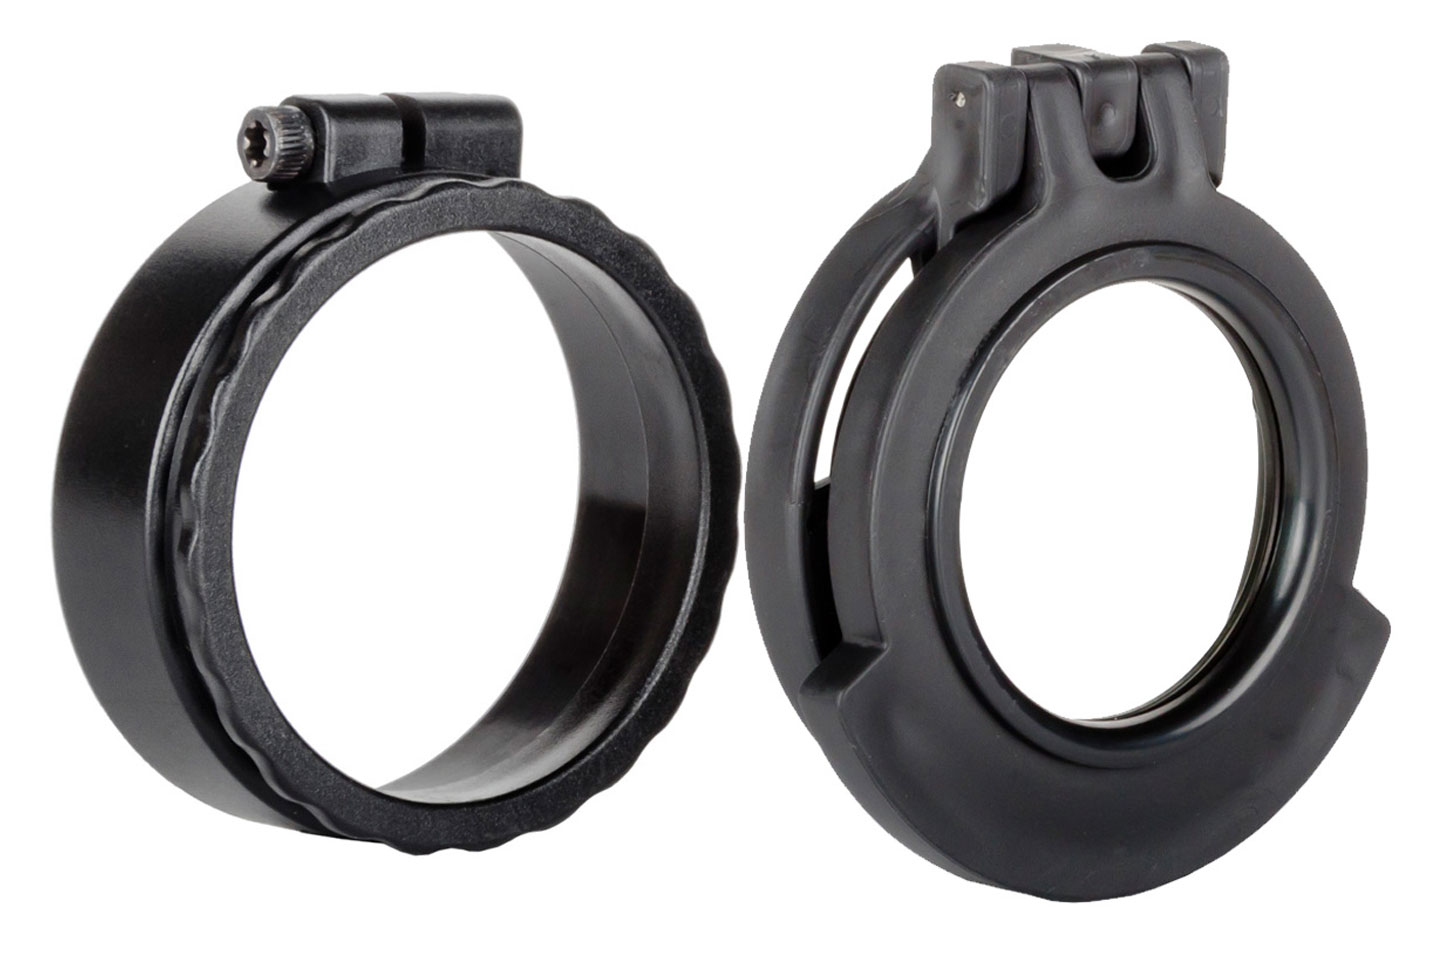 Trijicon MRO Flip Cover(Clear) with Adapter Ring-Objective